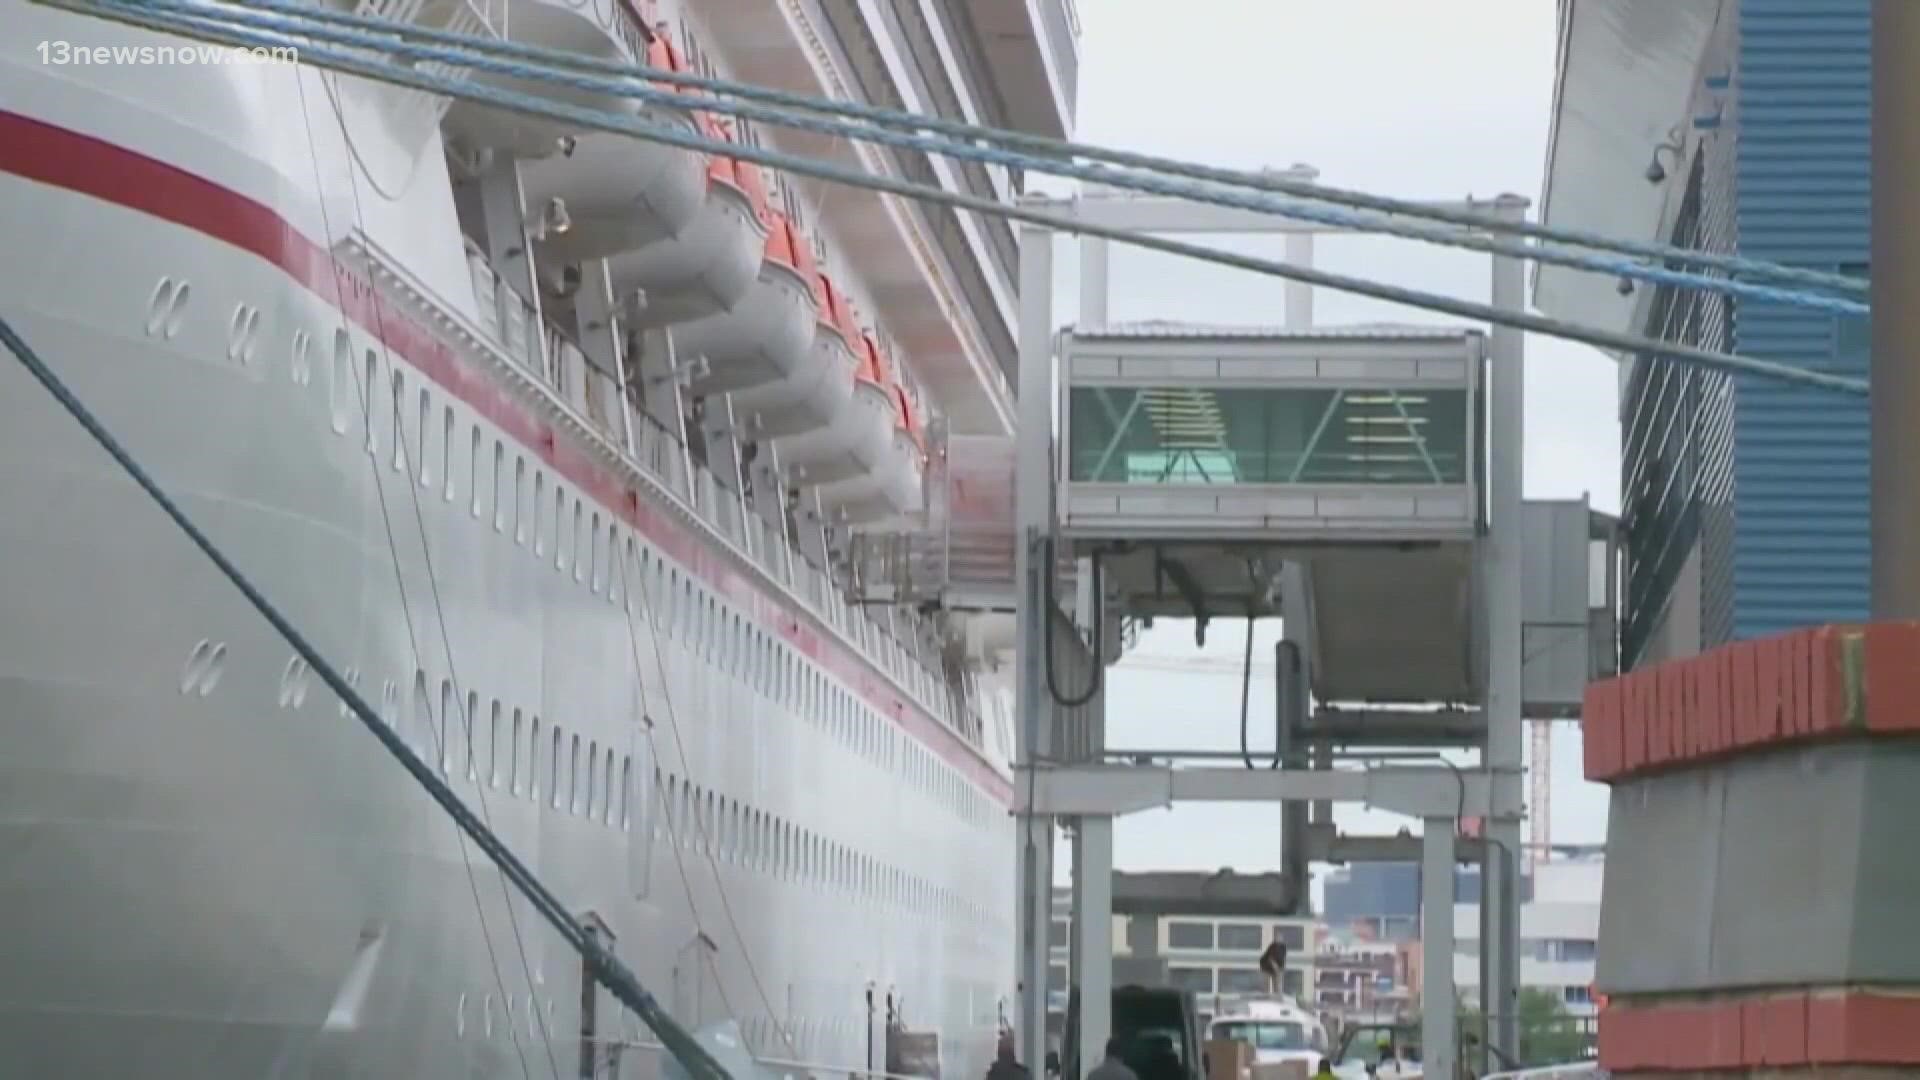 Cruises are still setting sail across the U.S., despite the CDC’s recent warning to steer clear of ships. Norfolk will welcome a cruise ship next month.